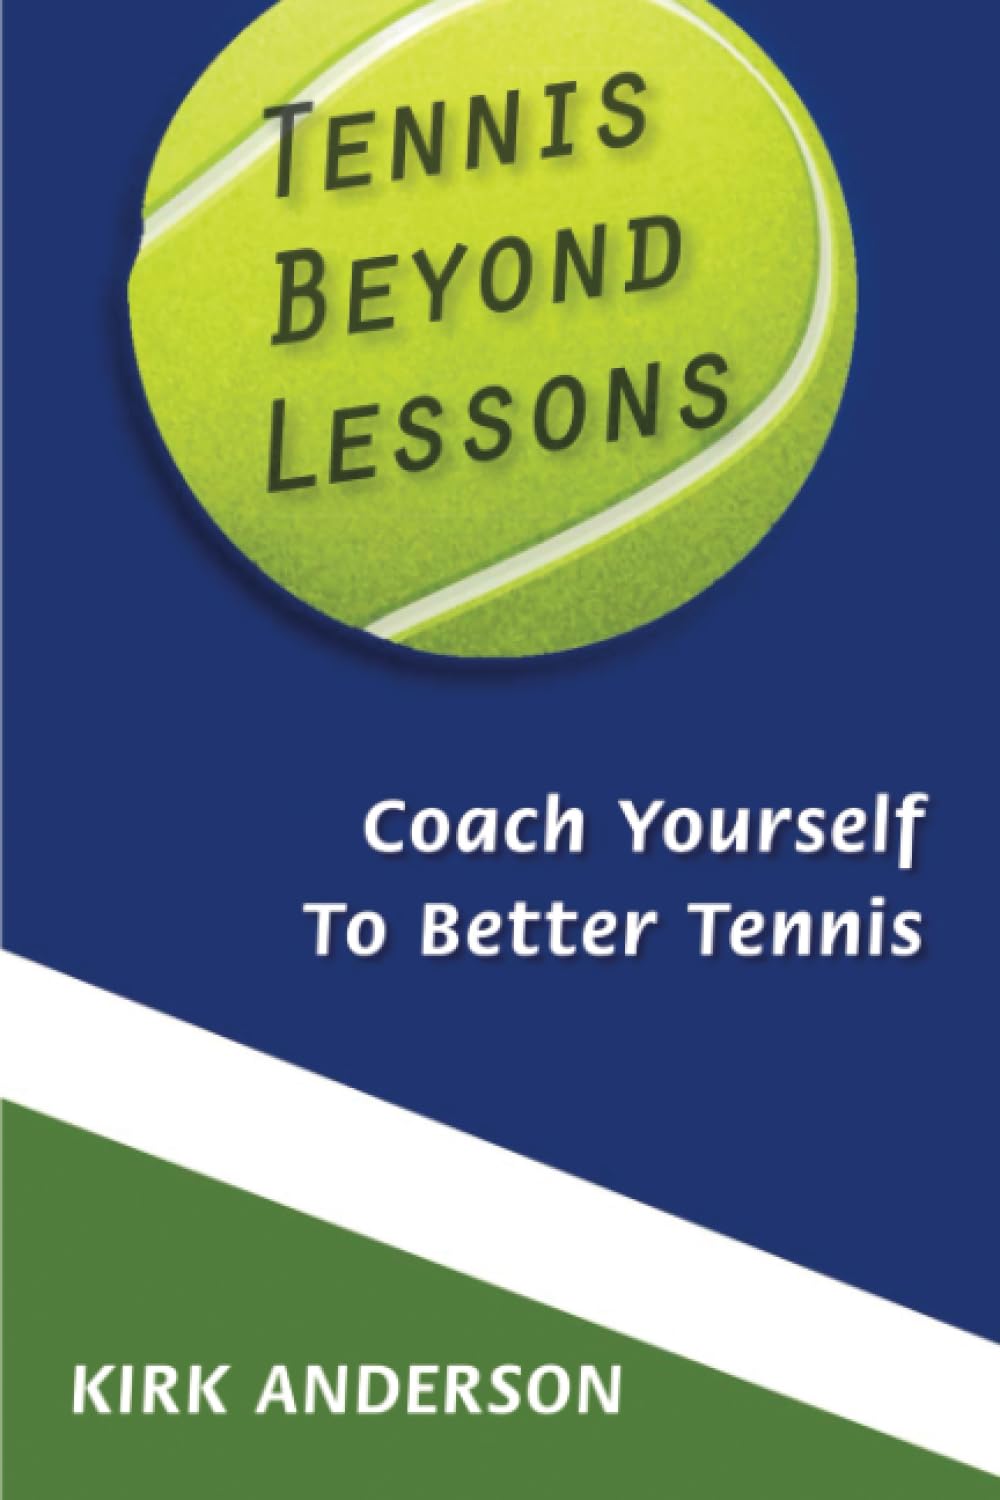 Tennis Beyond Lessons: Coach Yourself to Better Tennis